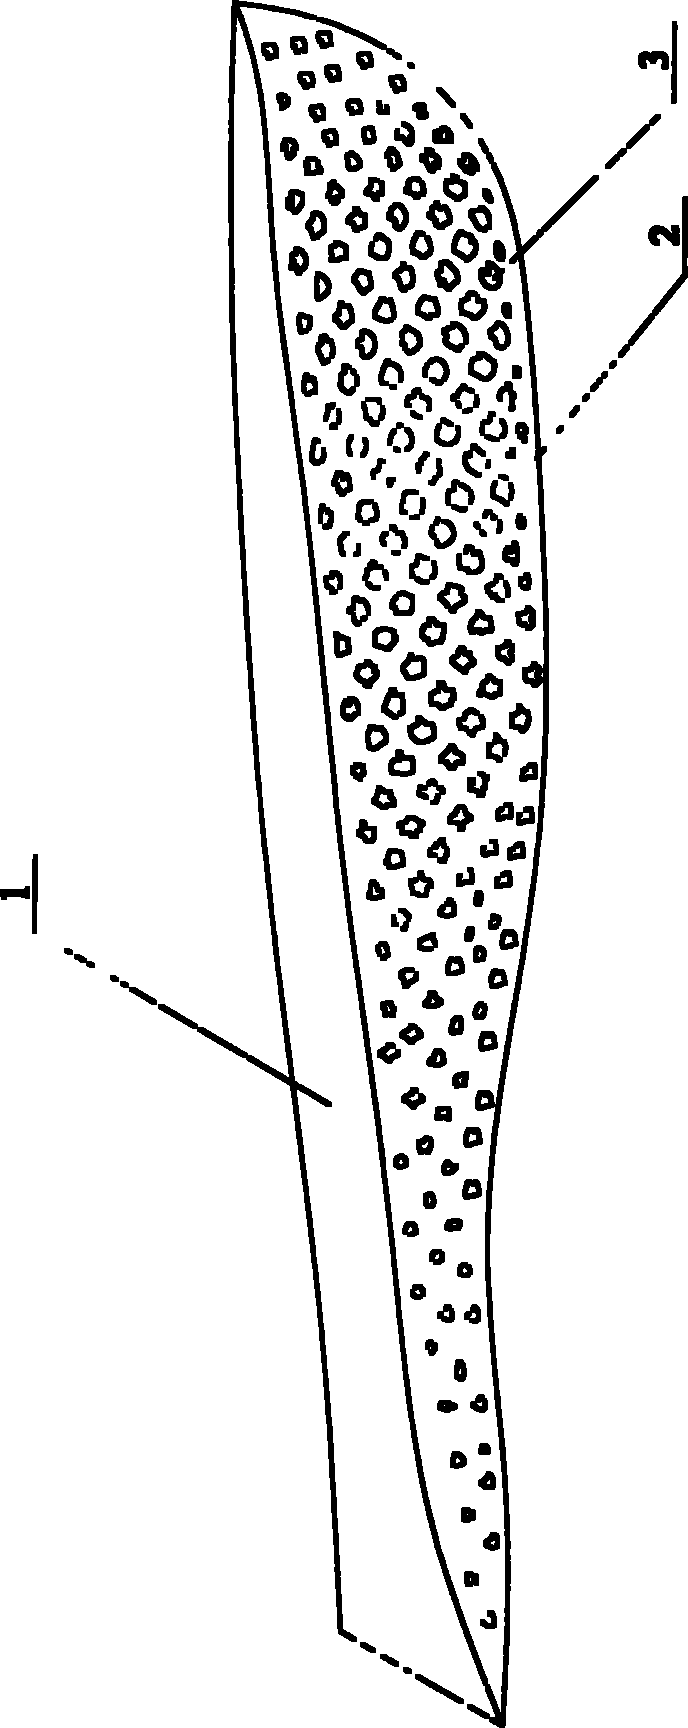 Insole structure of sneakers